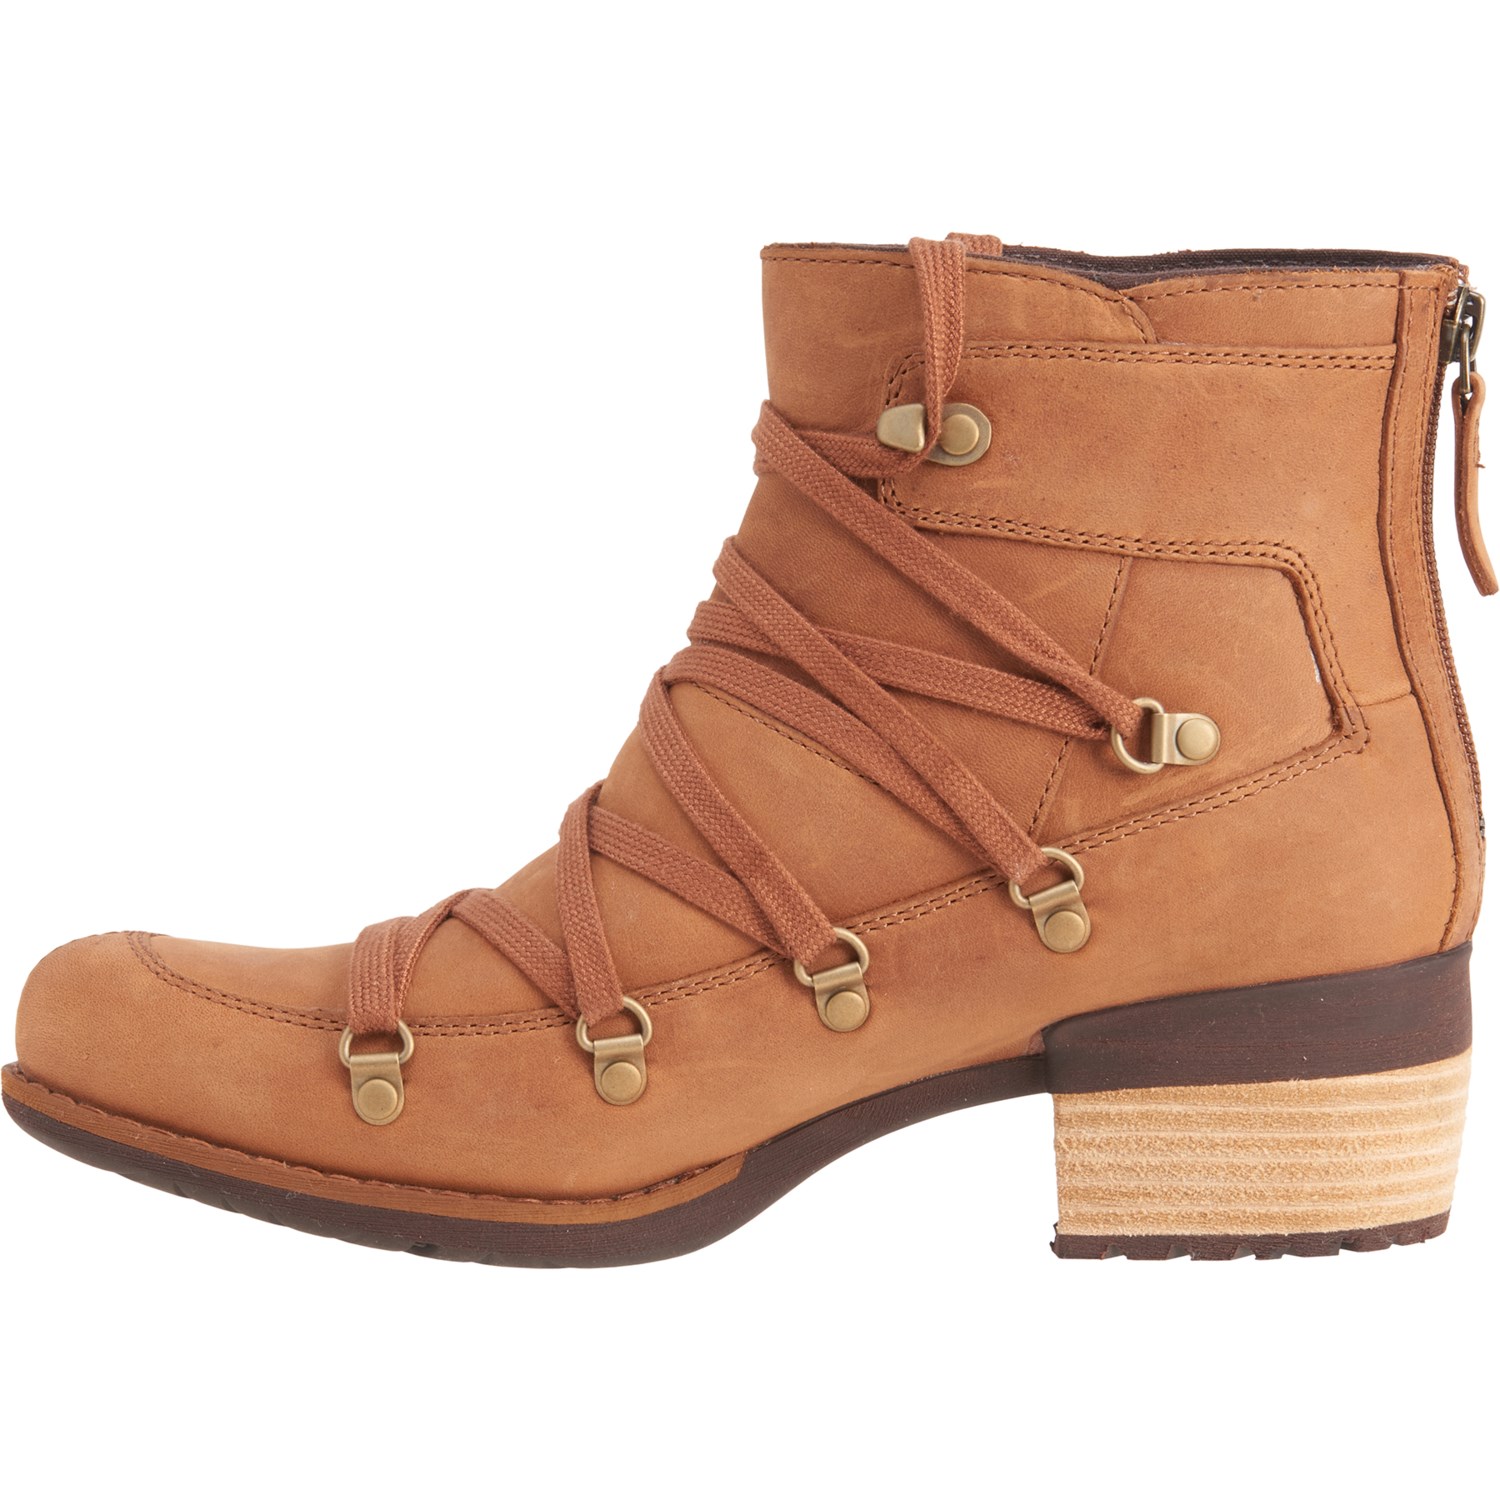 Merrell Shiloh II Boots (For Women) - Save 33%